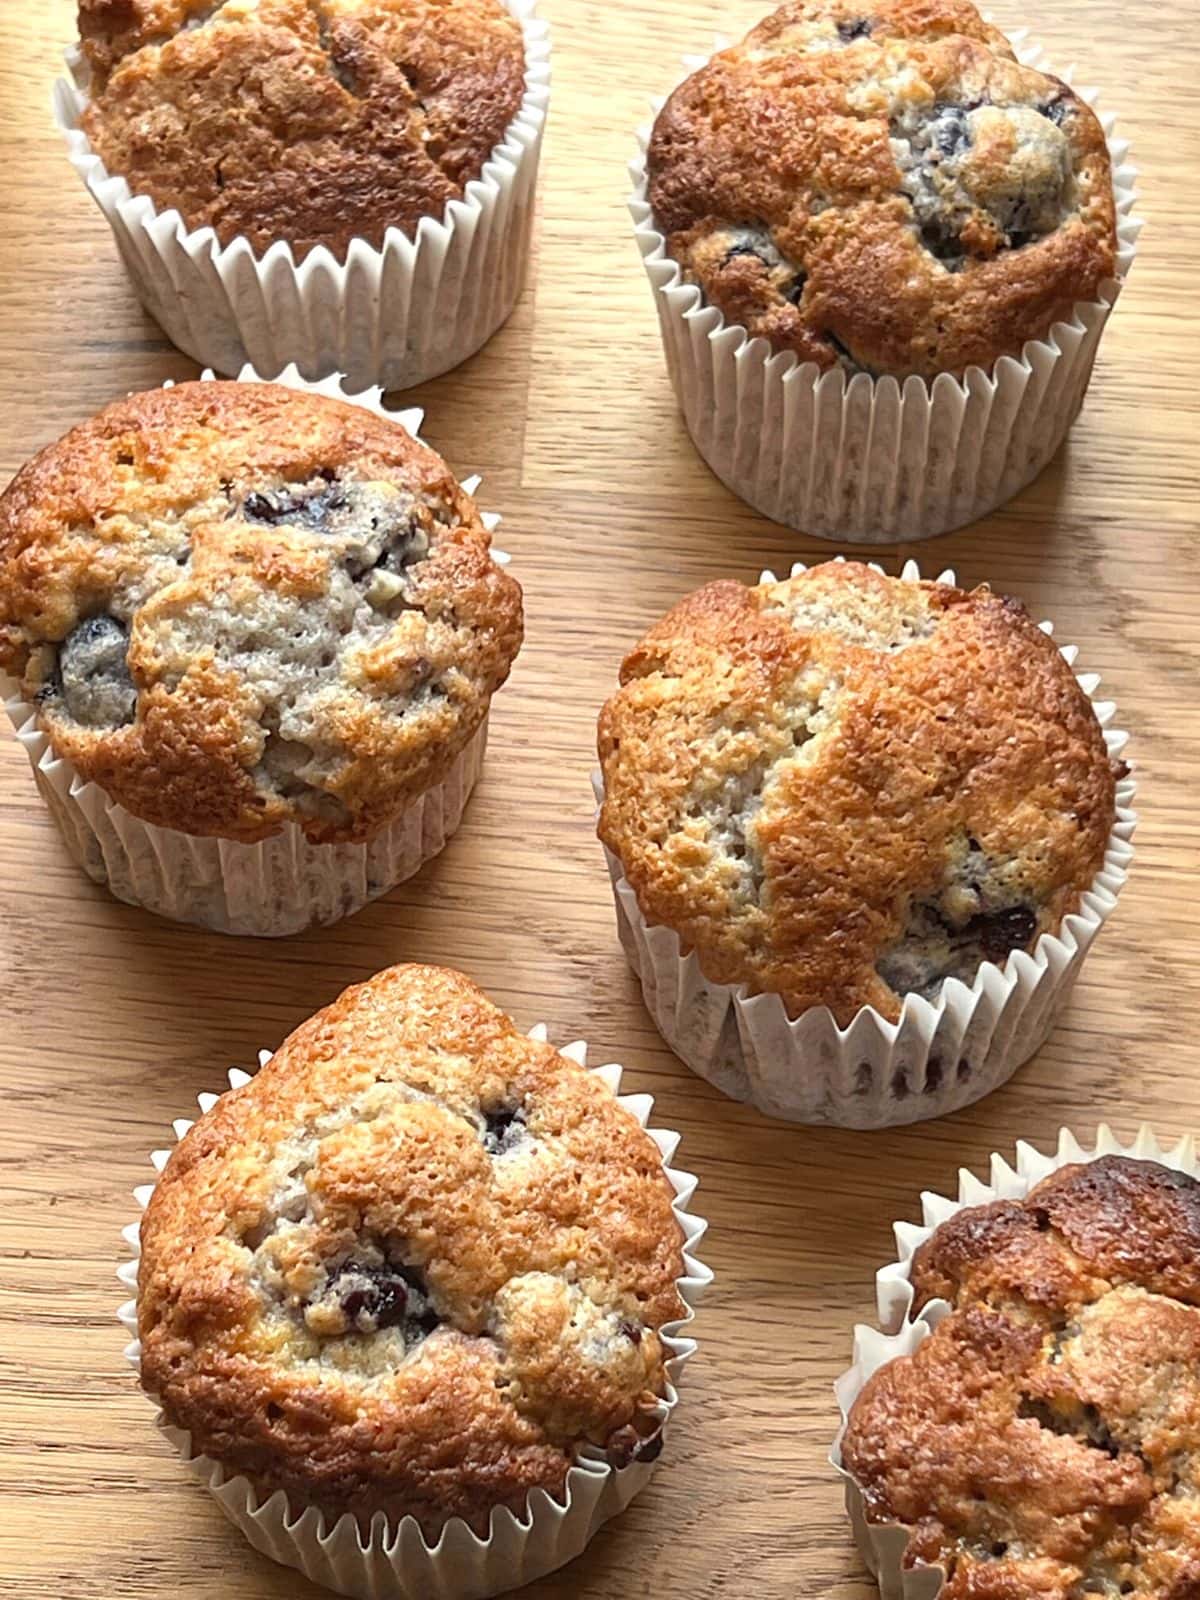 Cherry muffins on a wooden counter.